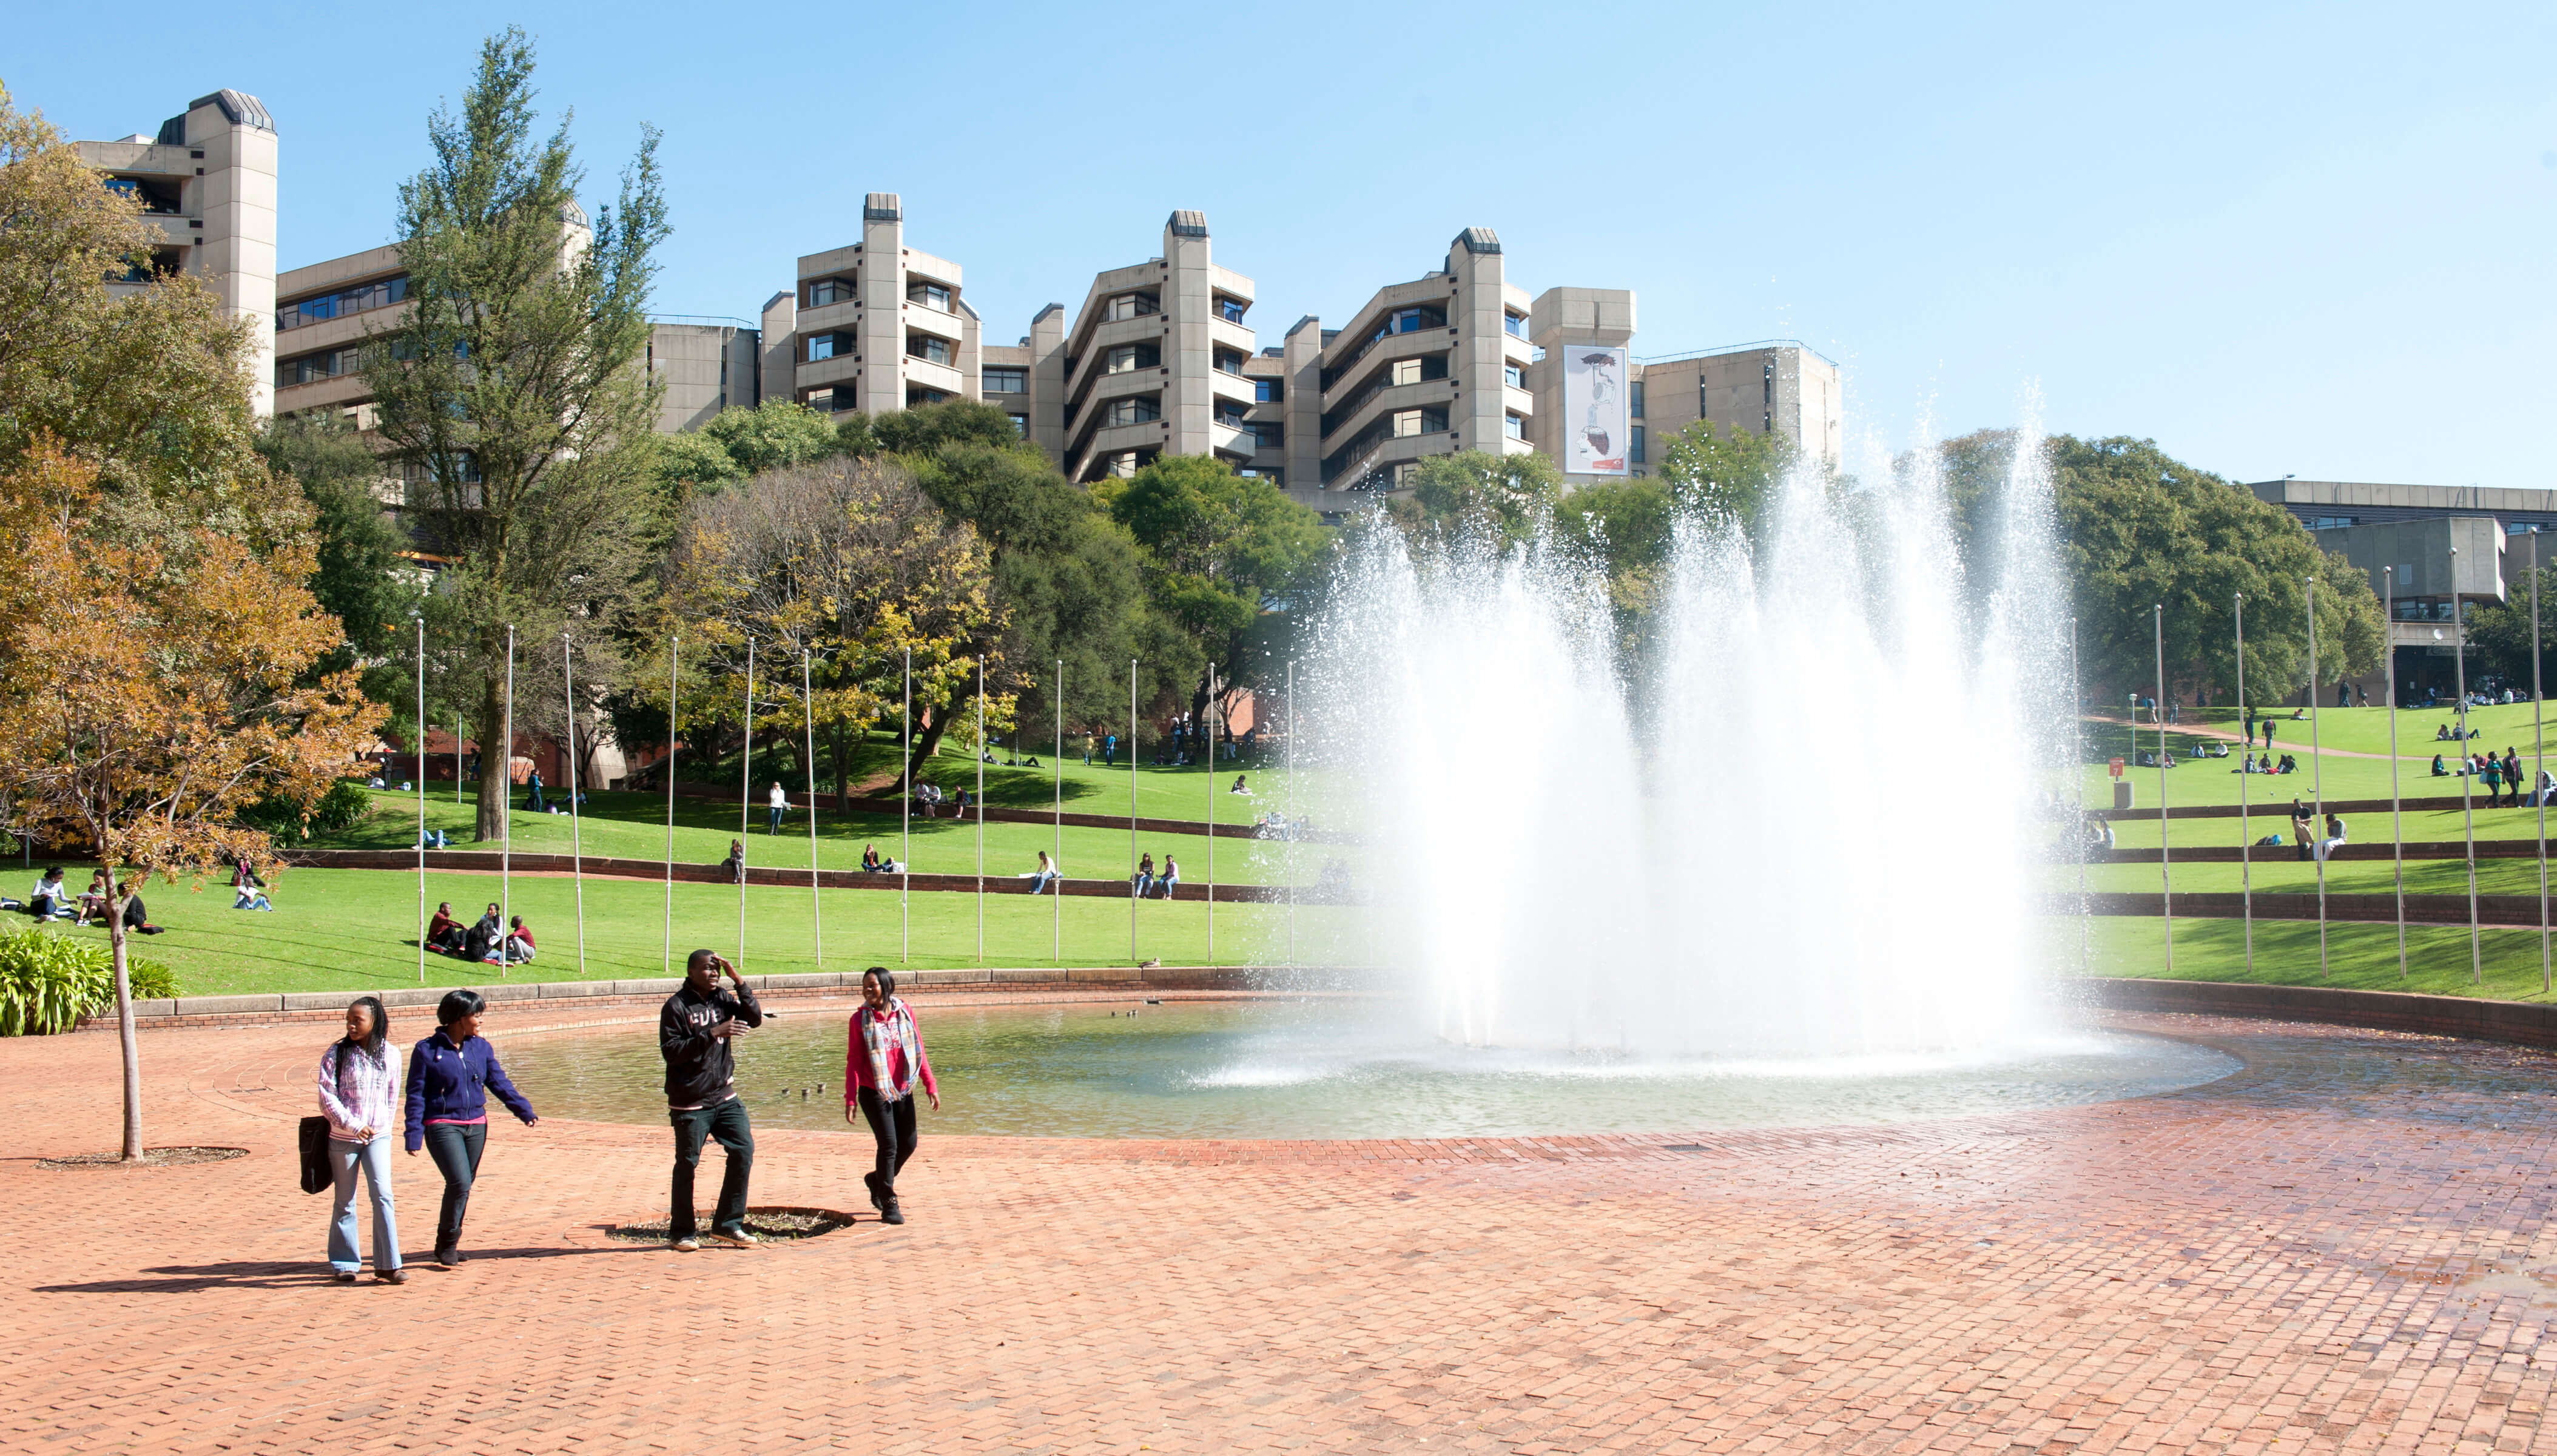 University of Johannesburg: Where global citizens are made